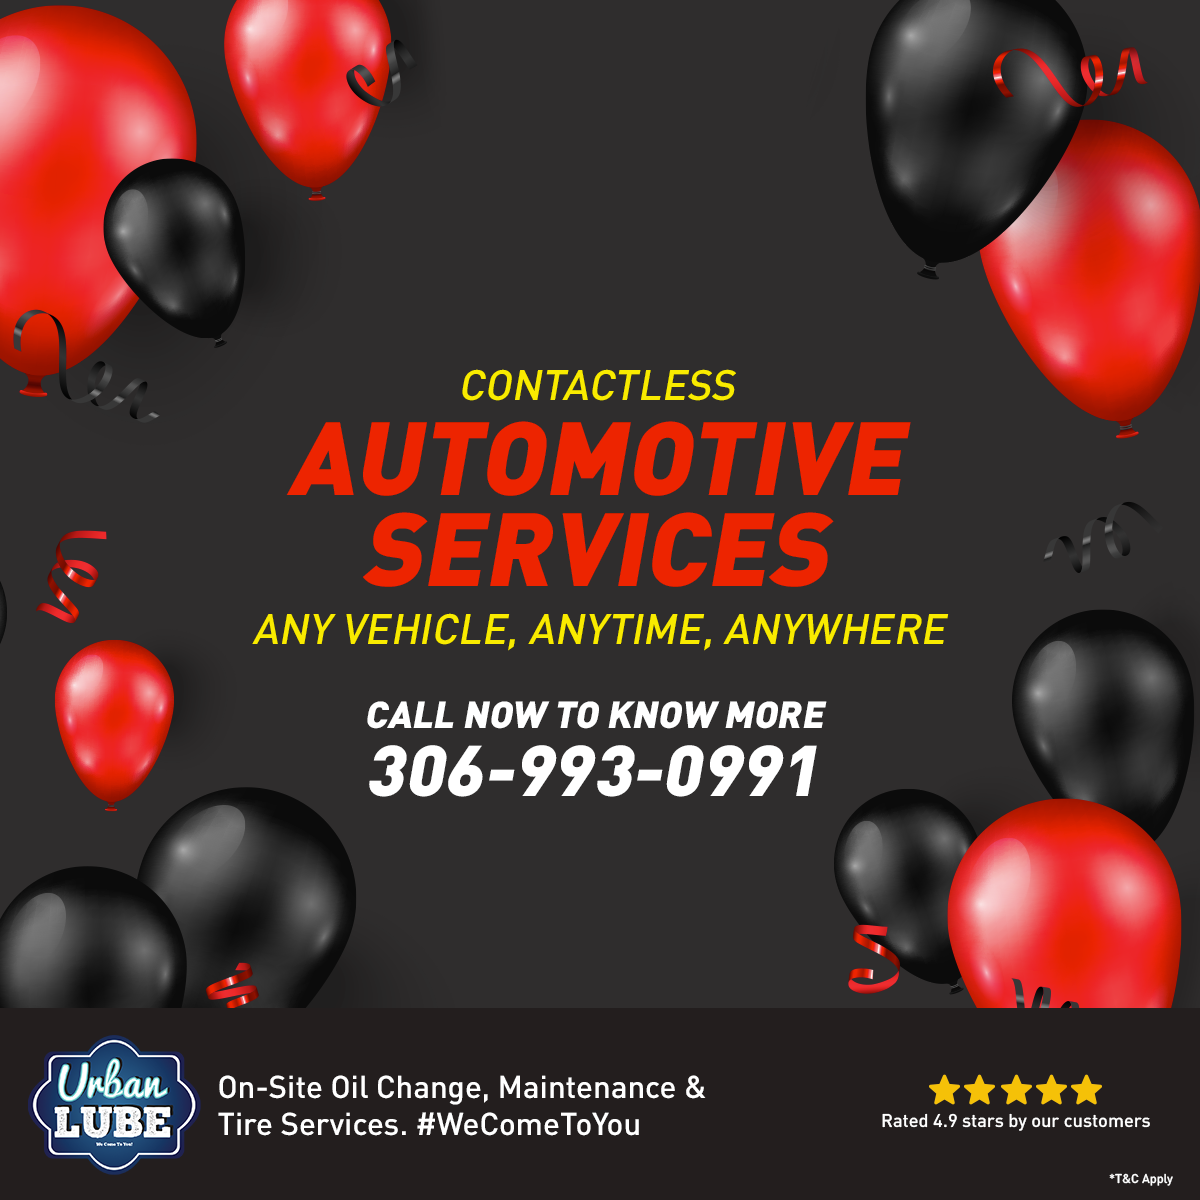 Along with your vehicle, we care for you! Now get #ContactlessServices anytime anywhere with #UrbanLube. To book your service or for more information call us on 306-993-0991

#OnSiteService #ShopLocalYQR #BatteryBoost #BestOilChange #WeComeToYou